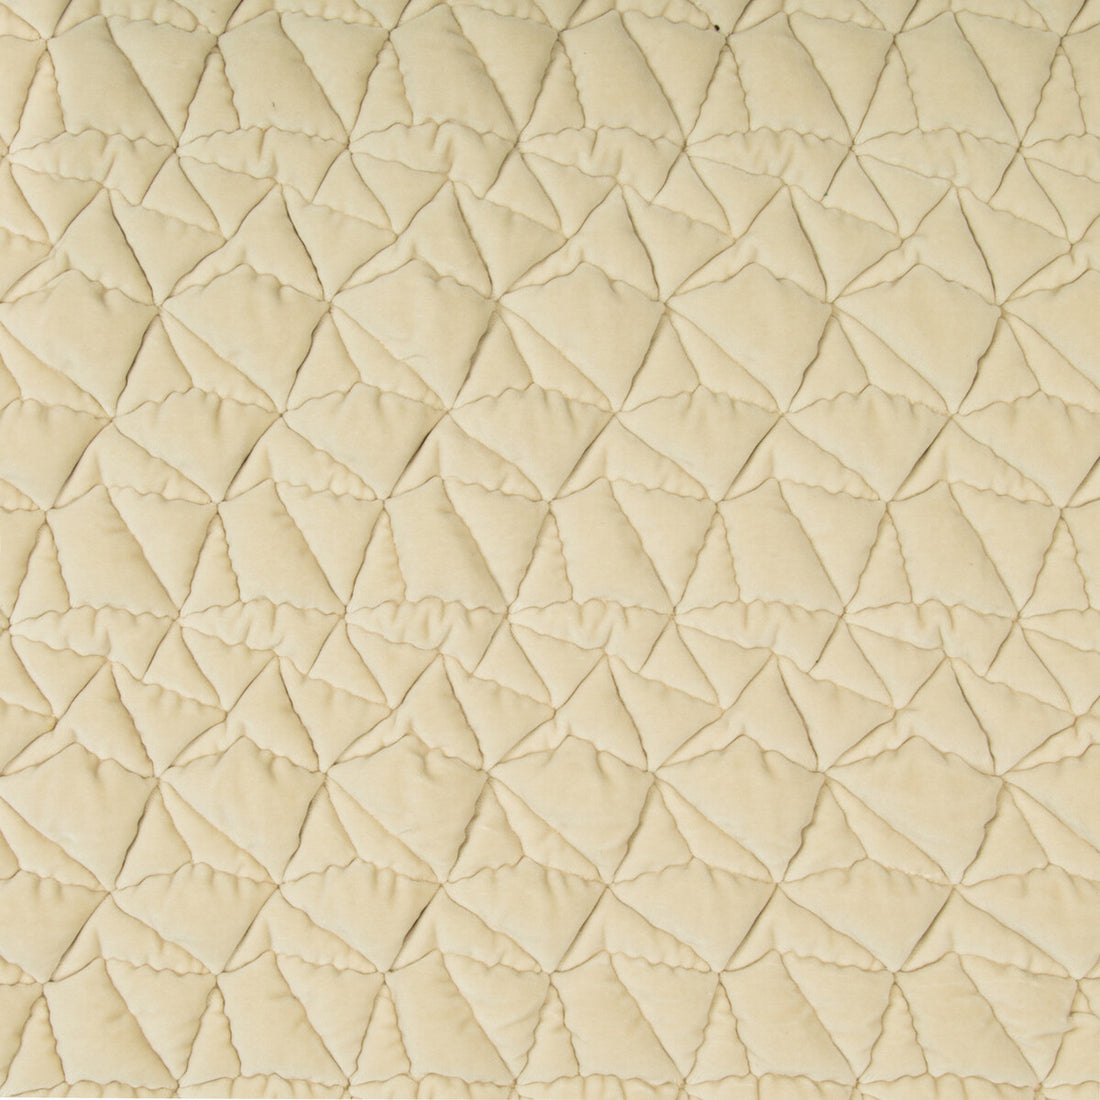 Taking Shape fabric in champagne color - pattern 34922.116.0 - by Kravet Couture in the Modern Tailor collection